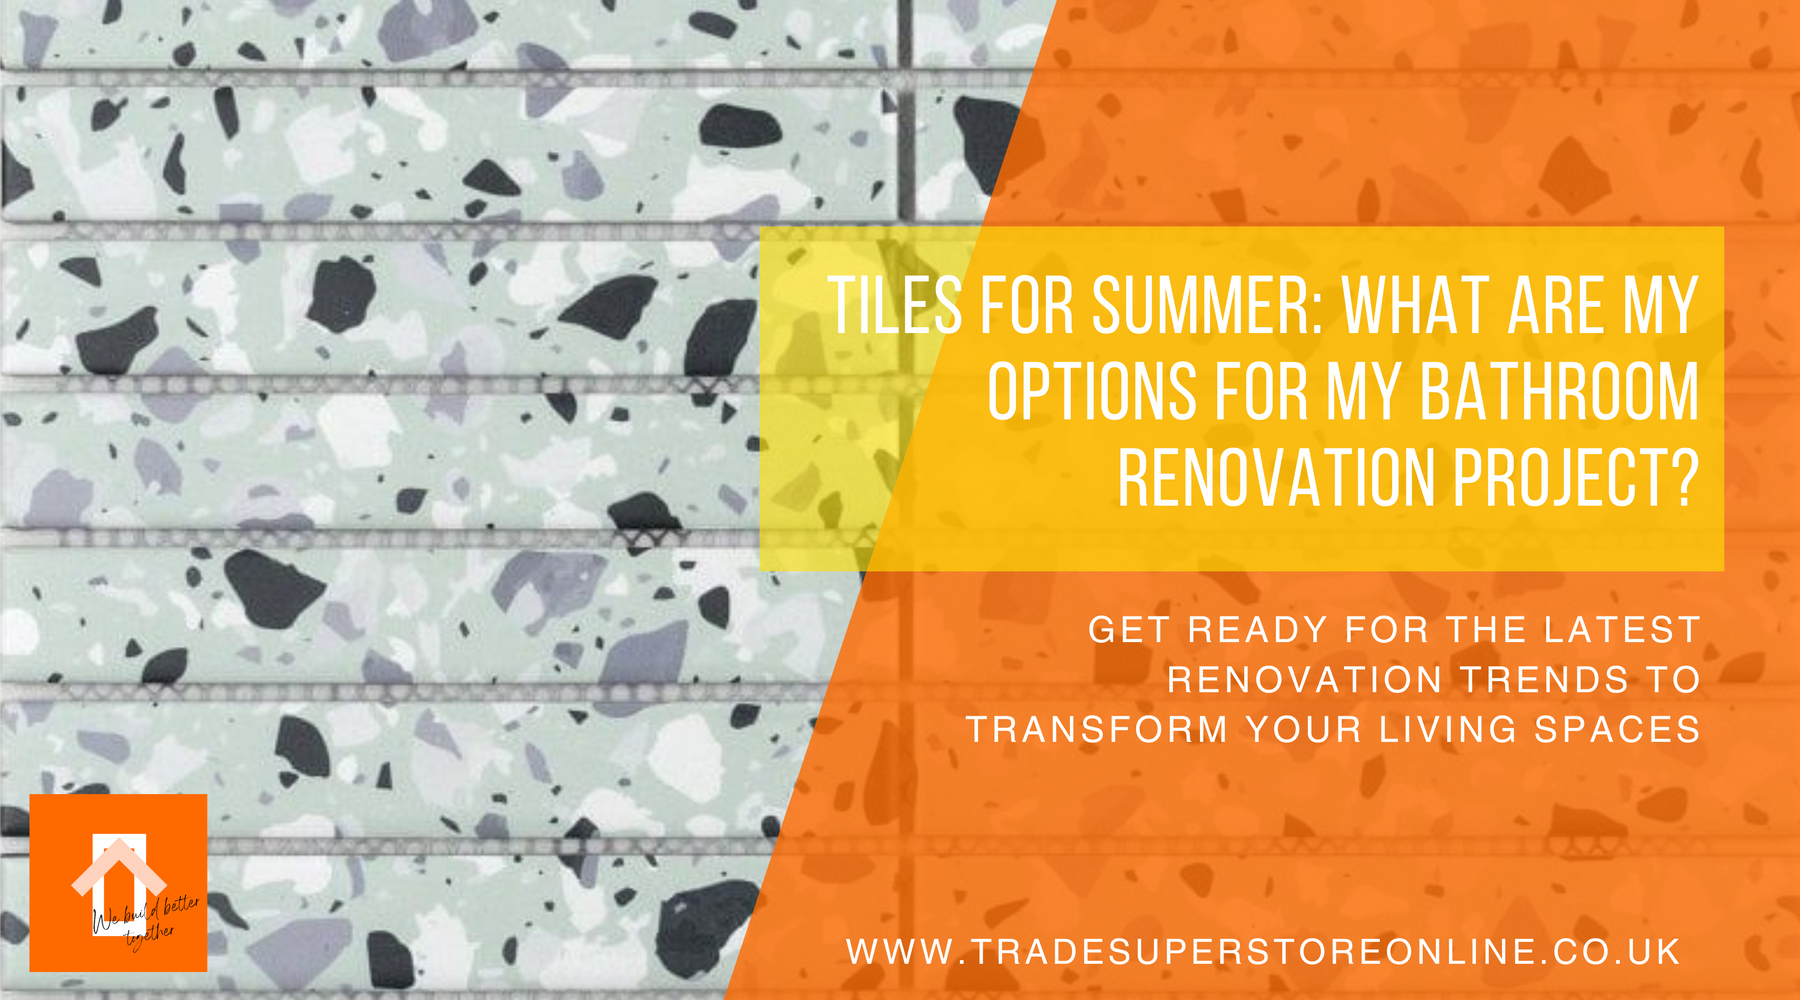 Tiles for Summer: What Are My Options for My Bathroom Renovation Project?